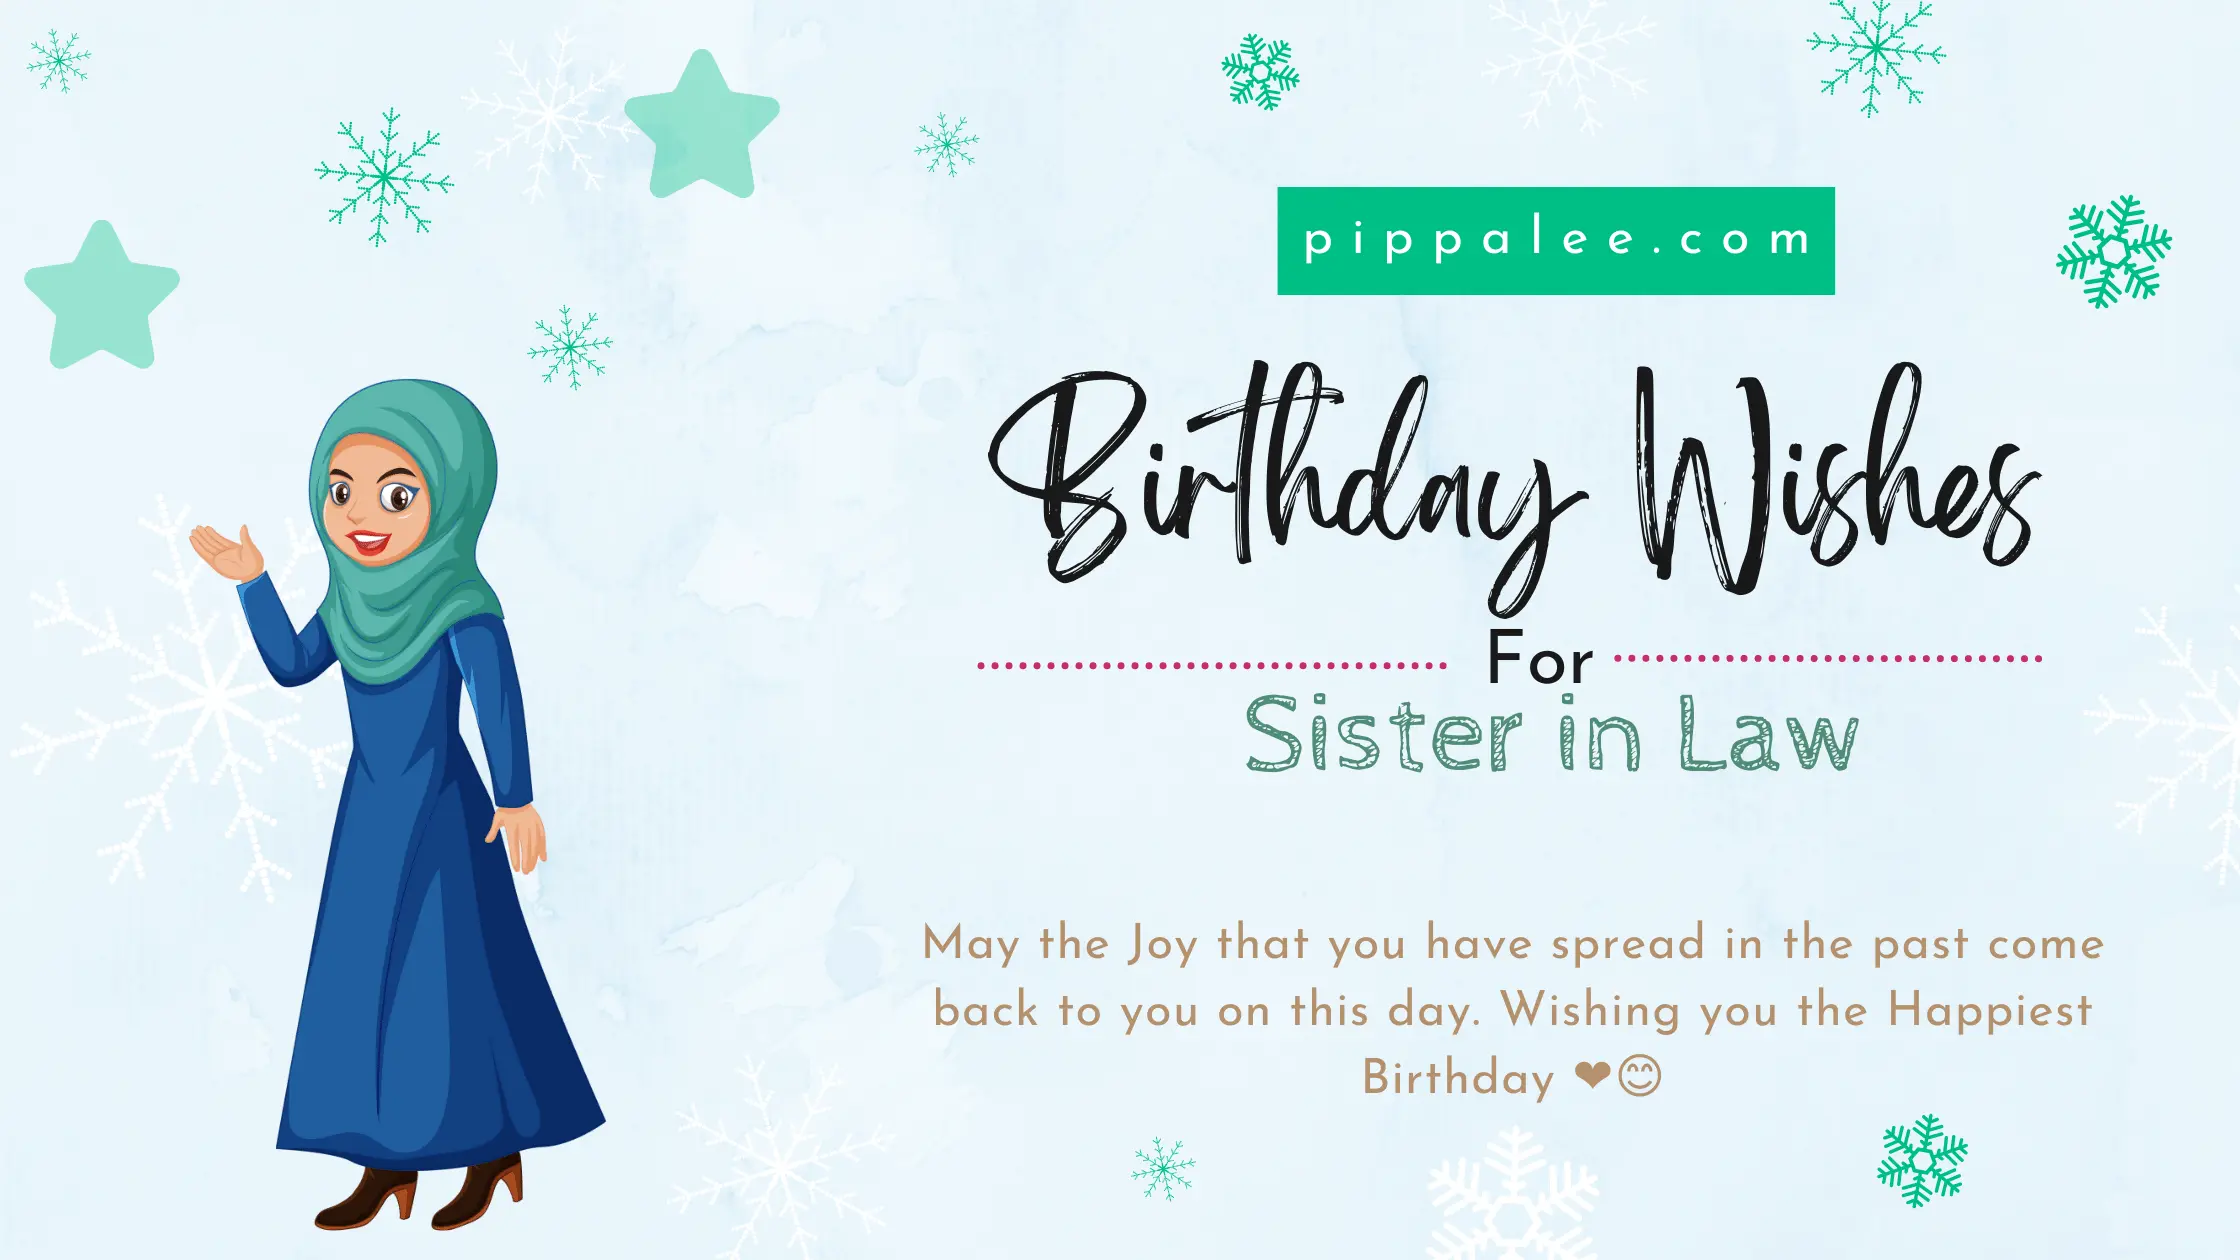 Birthday Wishes For Sister in Law - Cute Wishes